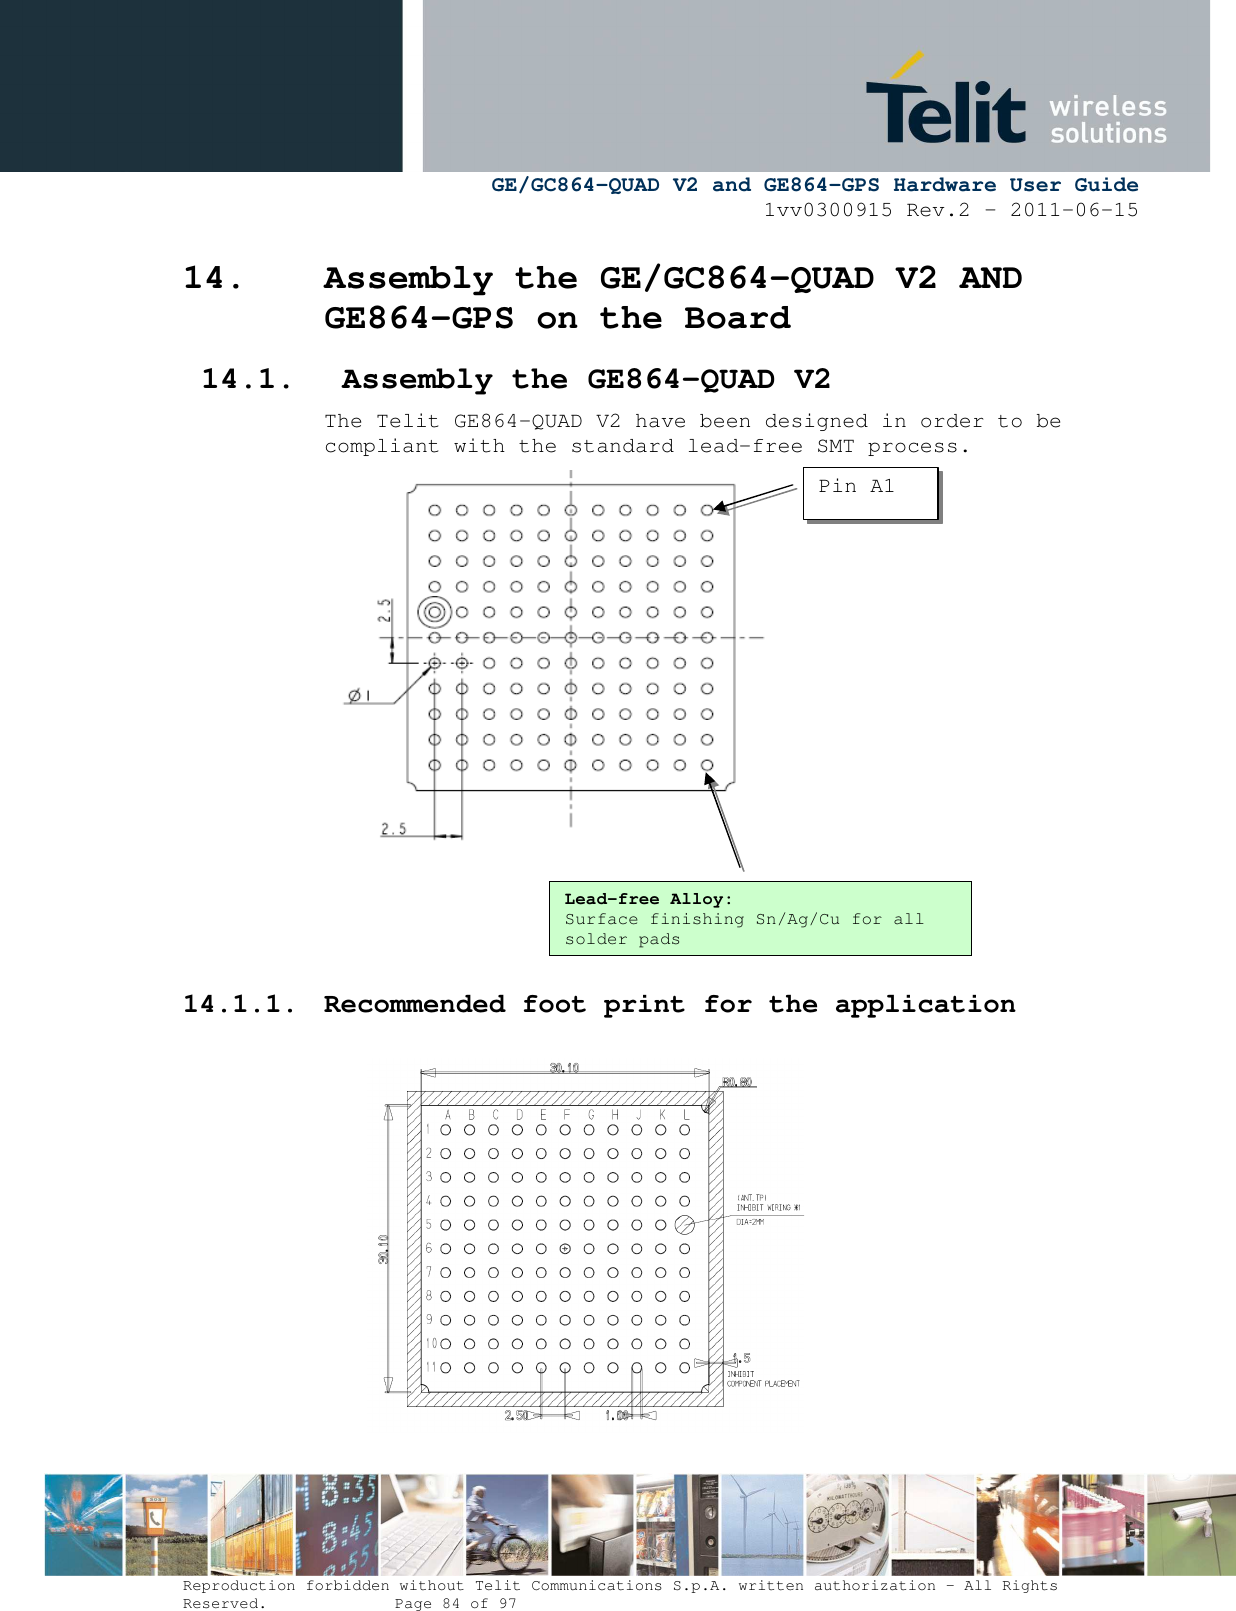      GE/GC864-QUAD V2 and GE864-GPS Hardware User Guide 1vv0300915 Rev.2 – 2011-06-15  Reproduction forbidden without Telit Communications S.p.A. written authorization - All Rights Reserved.    Page 84 of 97  14. Assembly the GE/GC864-QUAD V2 AND GE864-GPS on the Board 14.1. Assembly the GE864-QUAD V2 The Telit GE864-QUAD V2 have been designed in order to be compliant with the standard lead-free SMT process.     14.1.1. Recommended foot print for the application            Lead-free Alloy: Surface finishing Sn/Ag/Cu for all solder pads Pin A1 